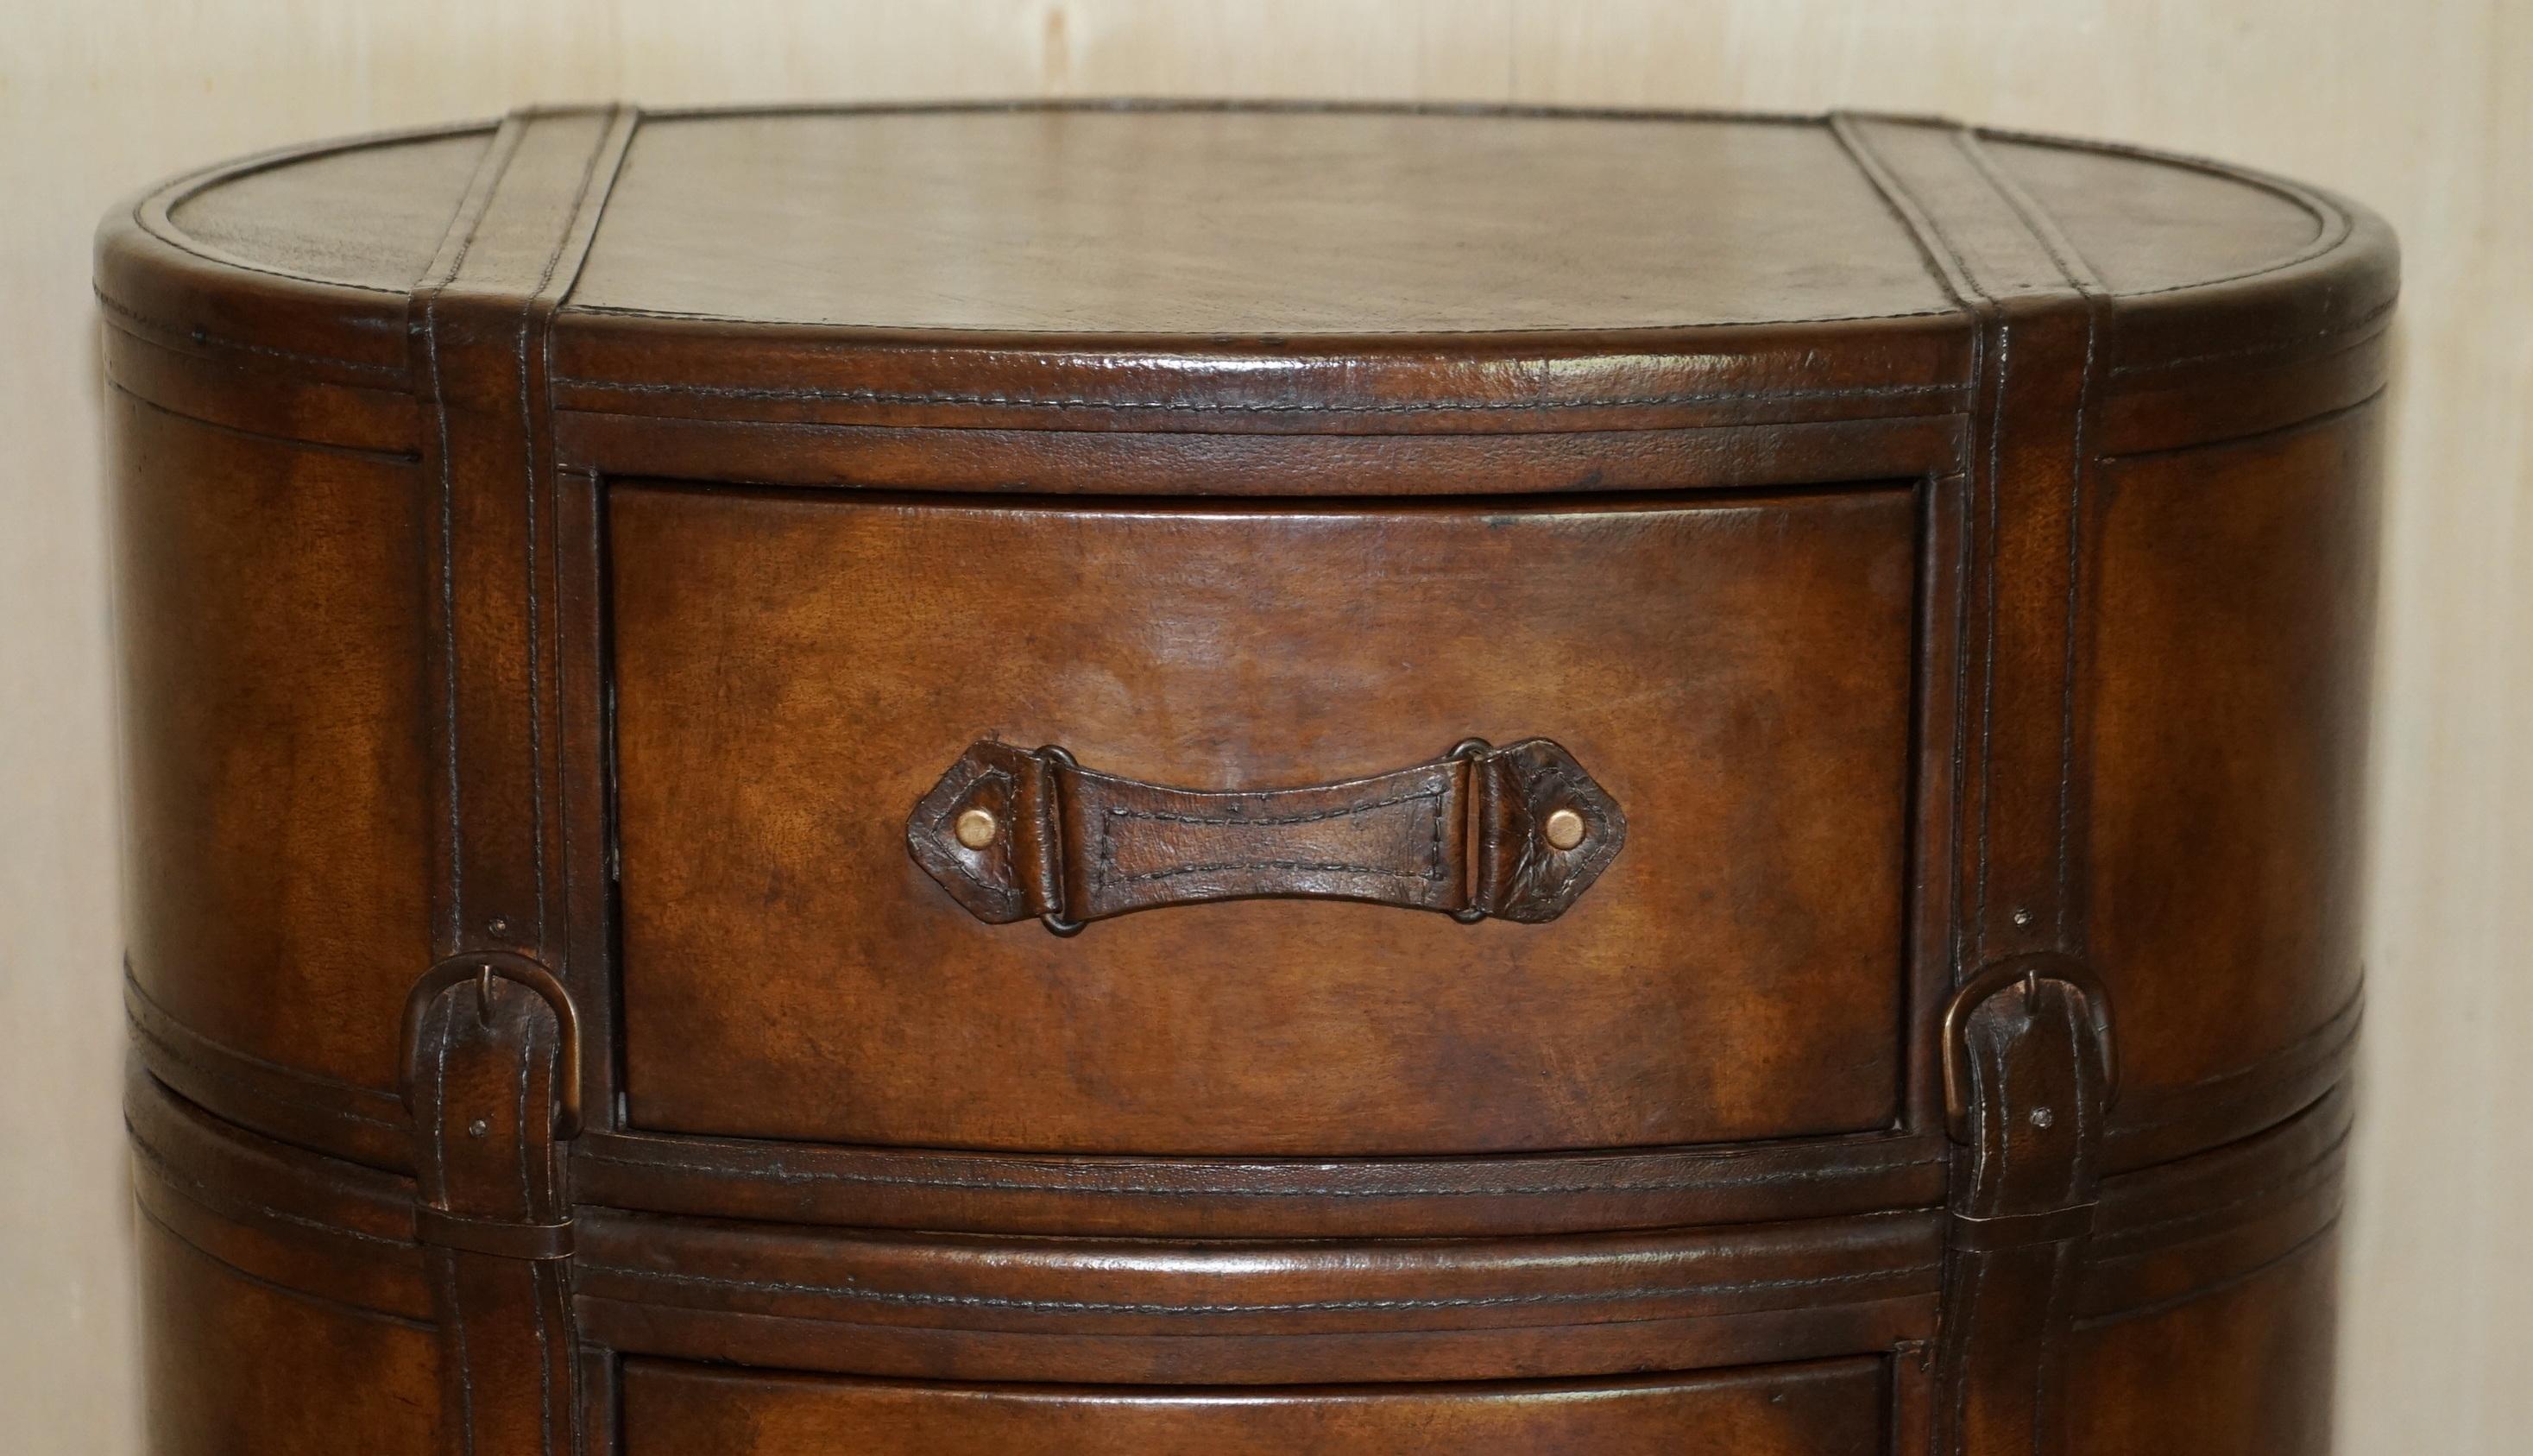 Hand-Crafted Brown Leather Oval Tallboy Chest of Drawers with Luggage Style Straps or Belts